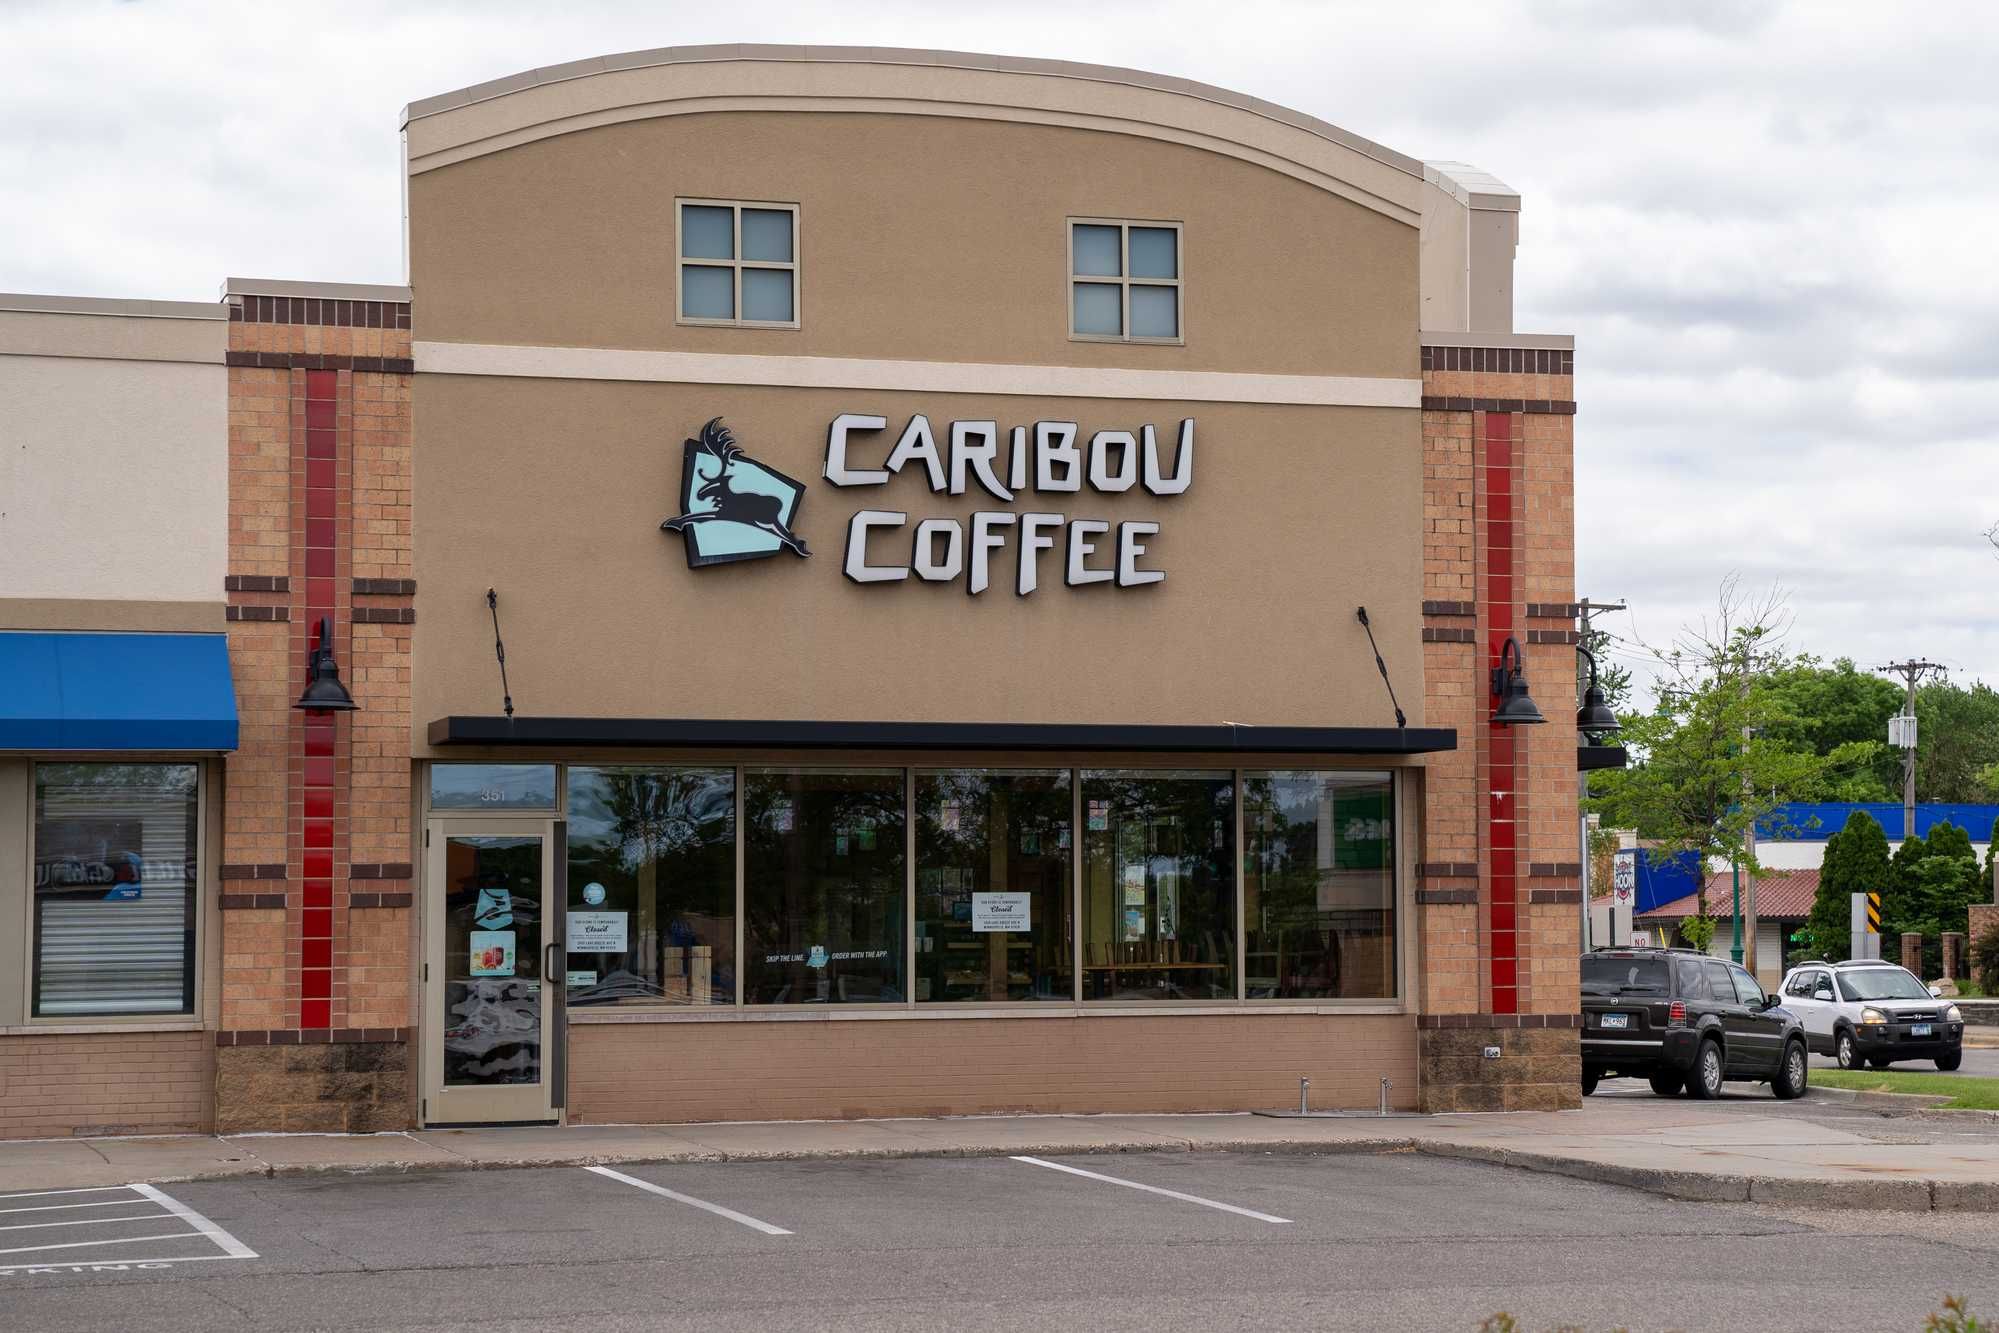 Caribou has agreed to a data breach settlement to resolve claims against them.